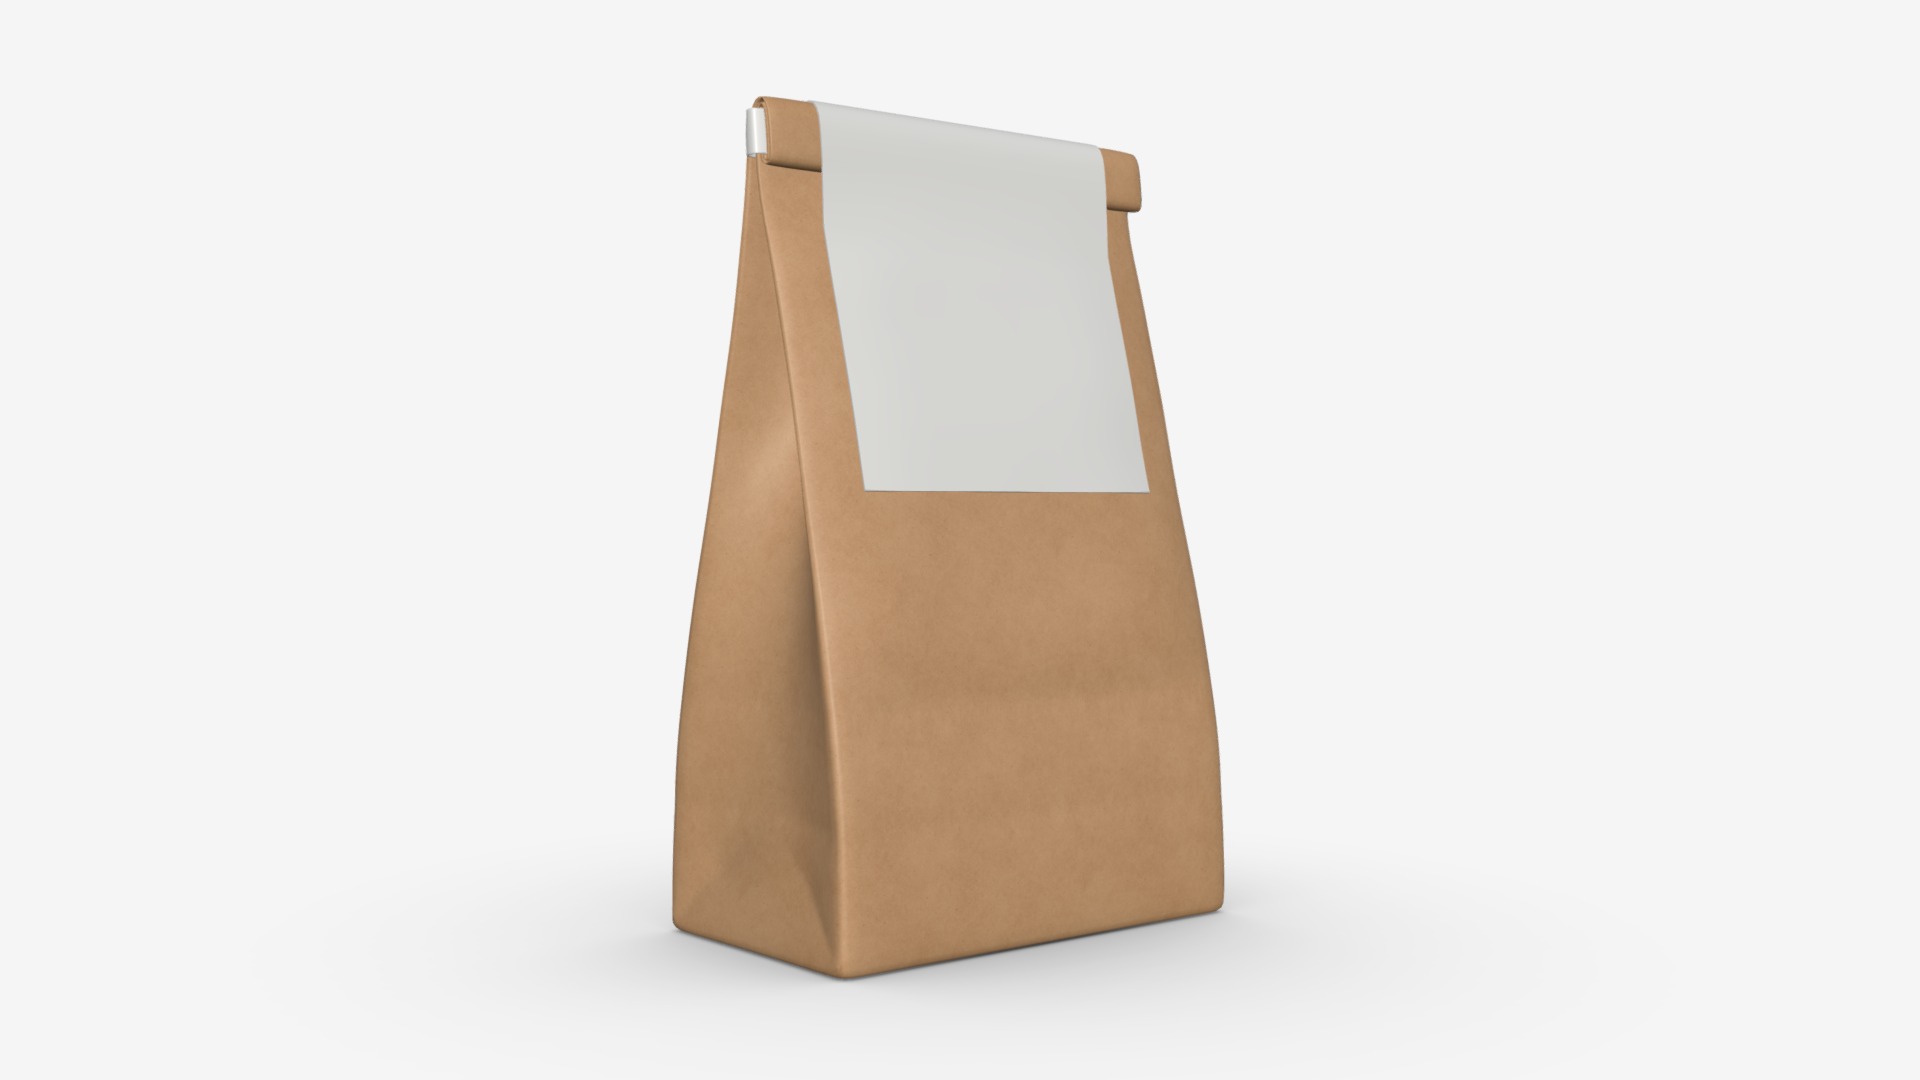 3D model Craft paper package 11 - This is a 3D model of the Craft paper package 11. The 3D model is about a brown paper bag.